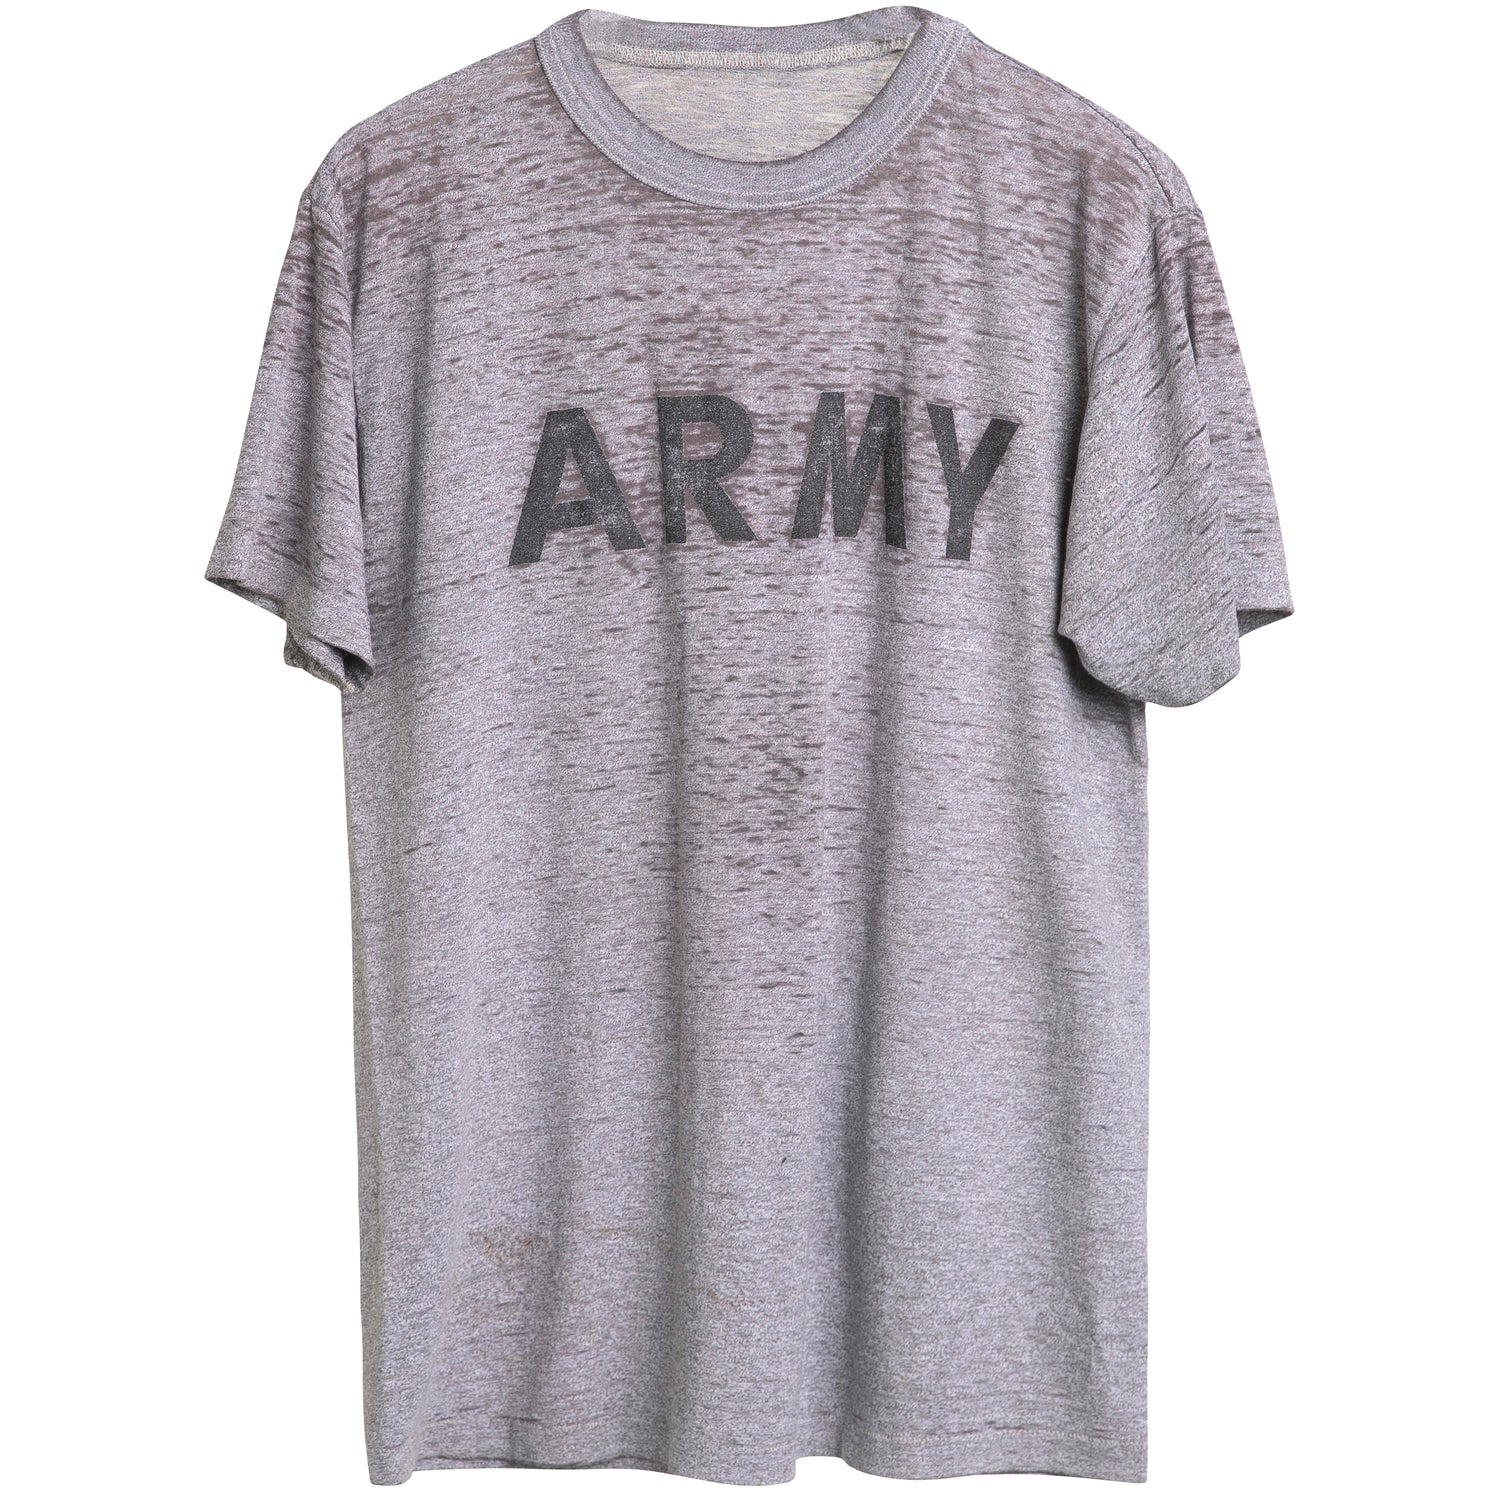 VINTAGE BEAT UP ARMY TEE - MORE SIZES